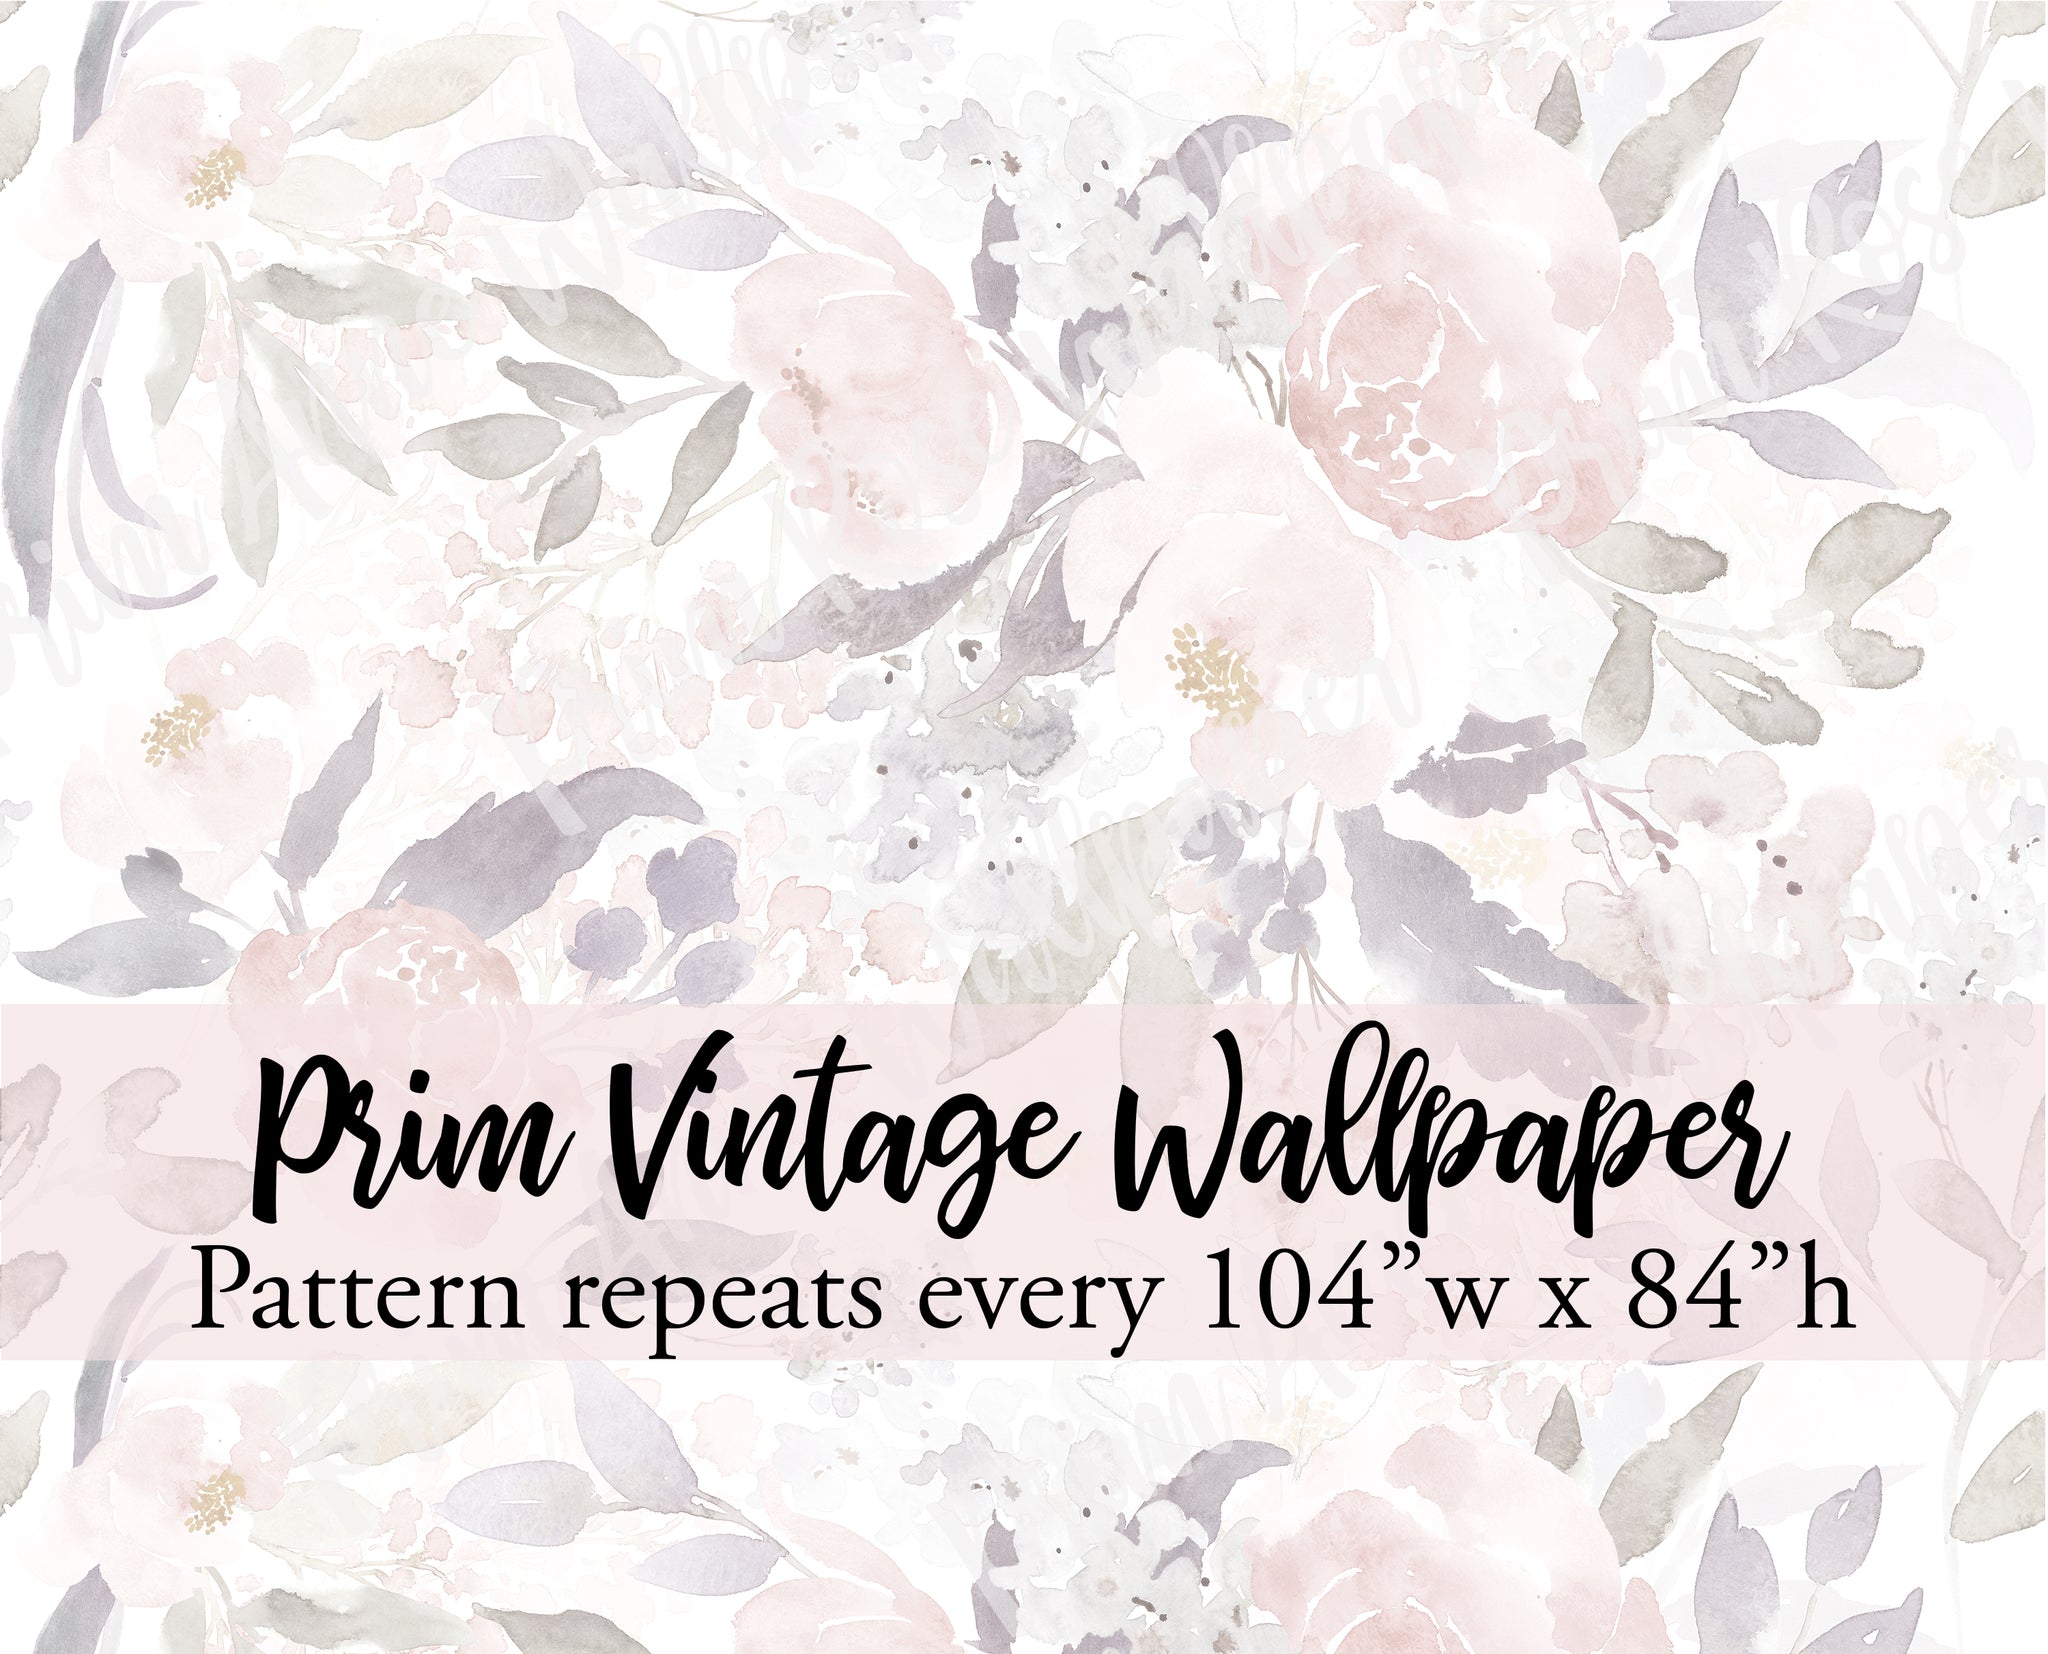 shabby chic floral twitter backgrounds